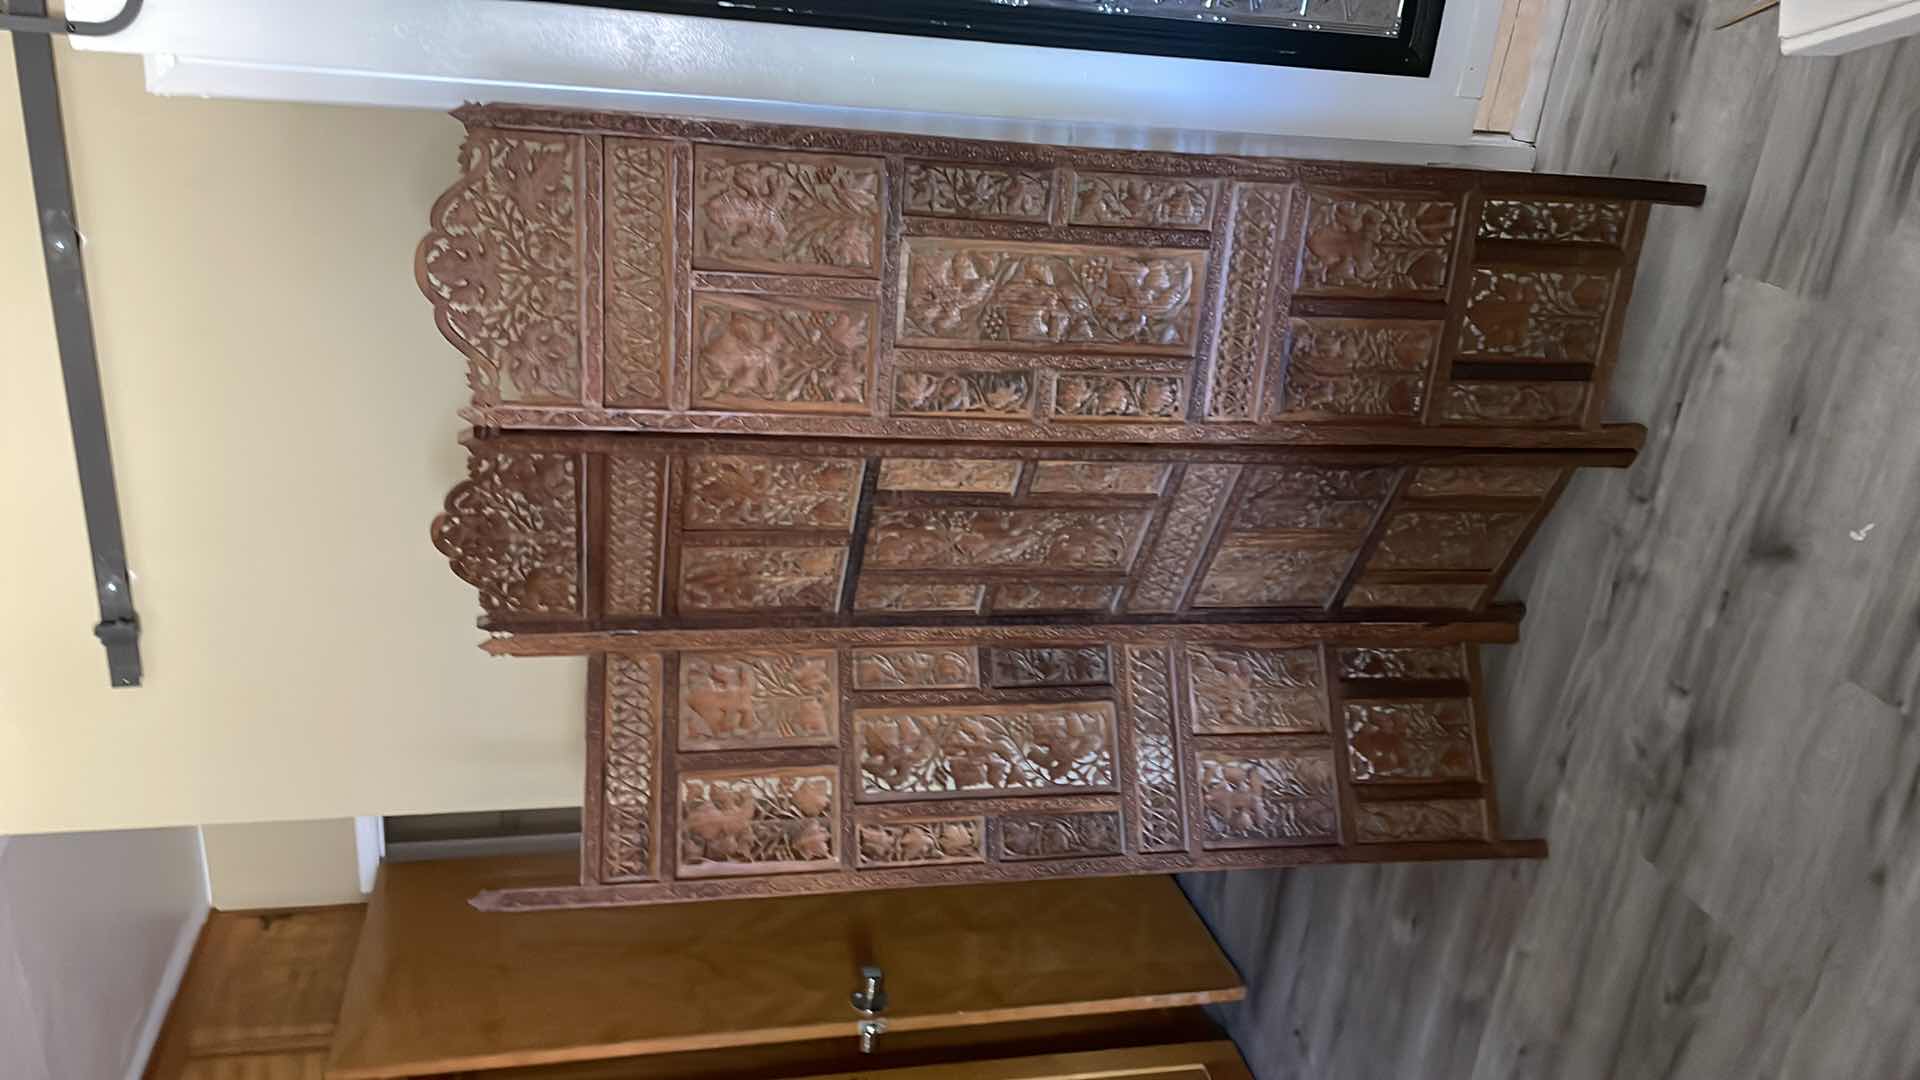 Photo 5 of HAND CARVED ROOM DIVIDER 46”x 68”H MISSING TOP PIECE ON END